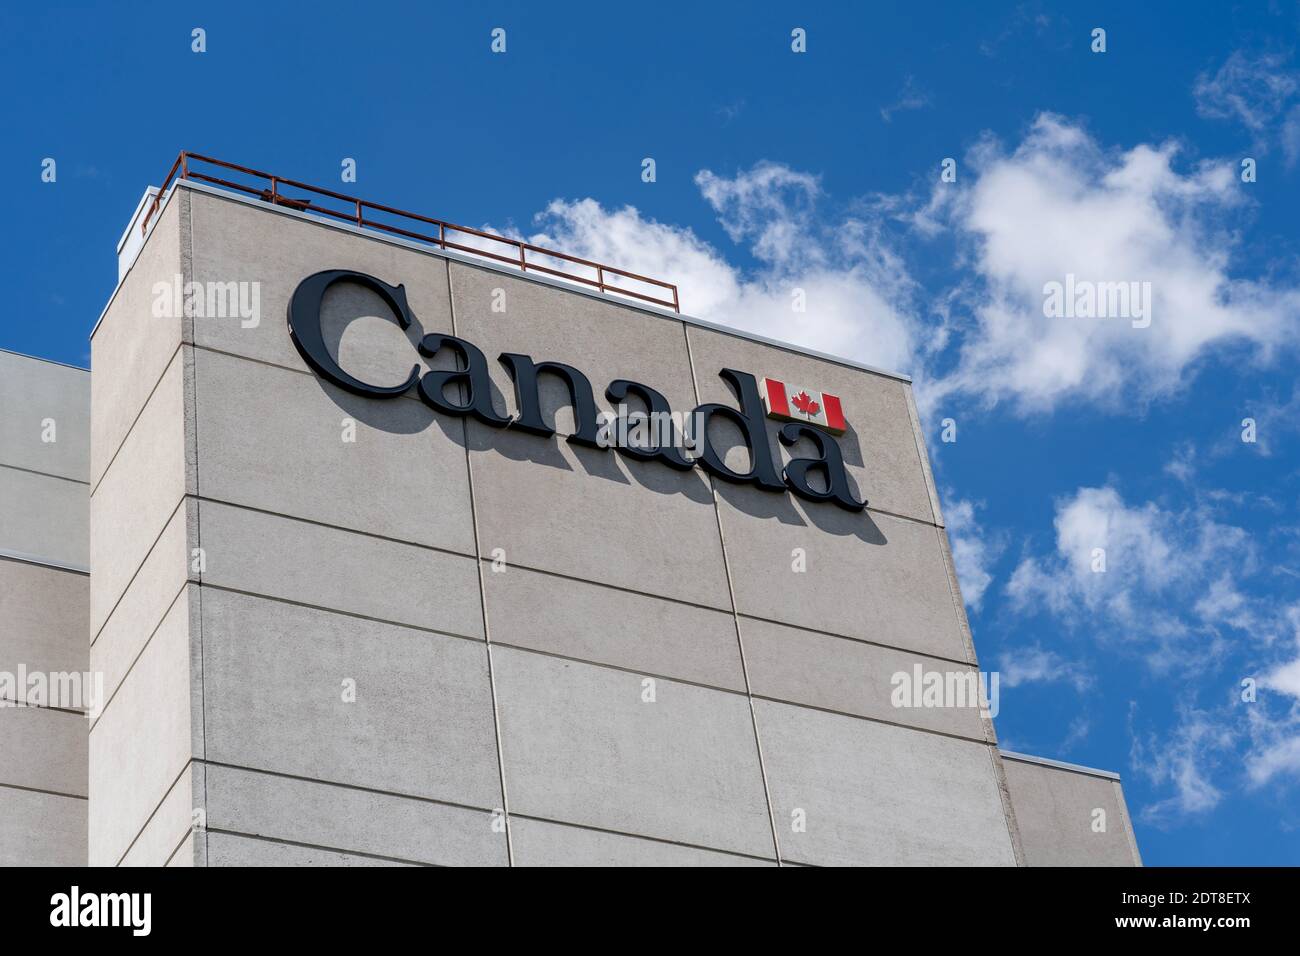 Government of Canada logo on the building in Ottawa, Ontario, Canada Stock Photo